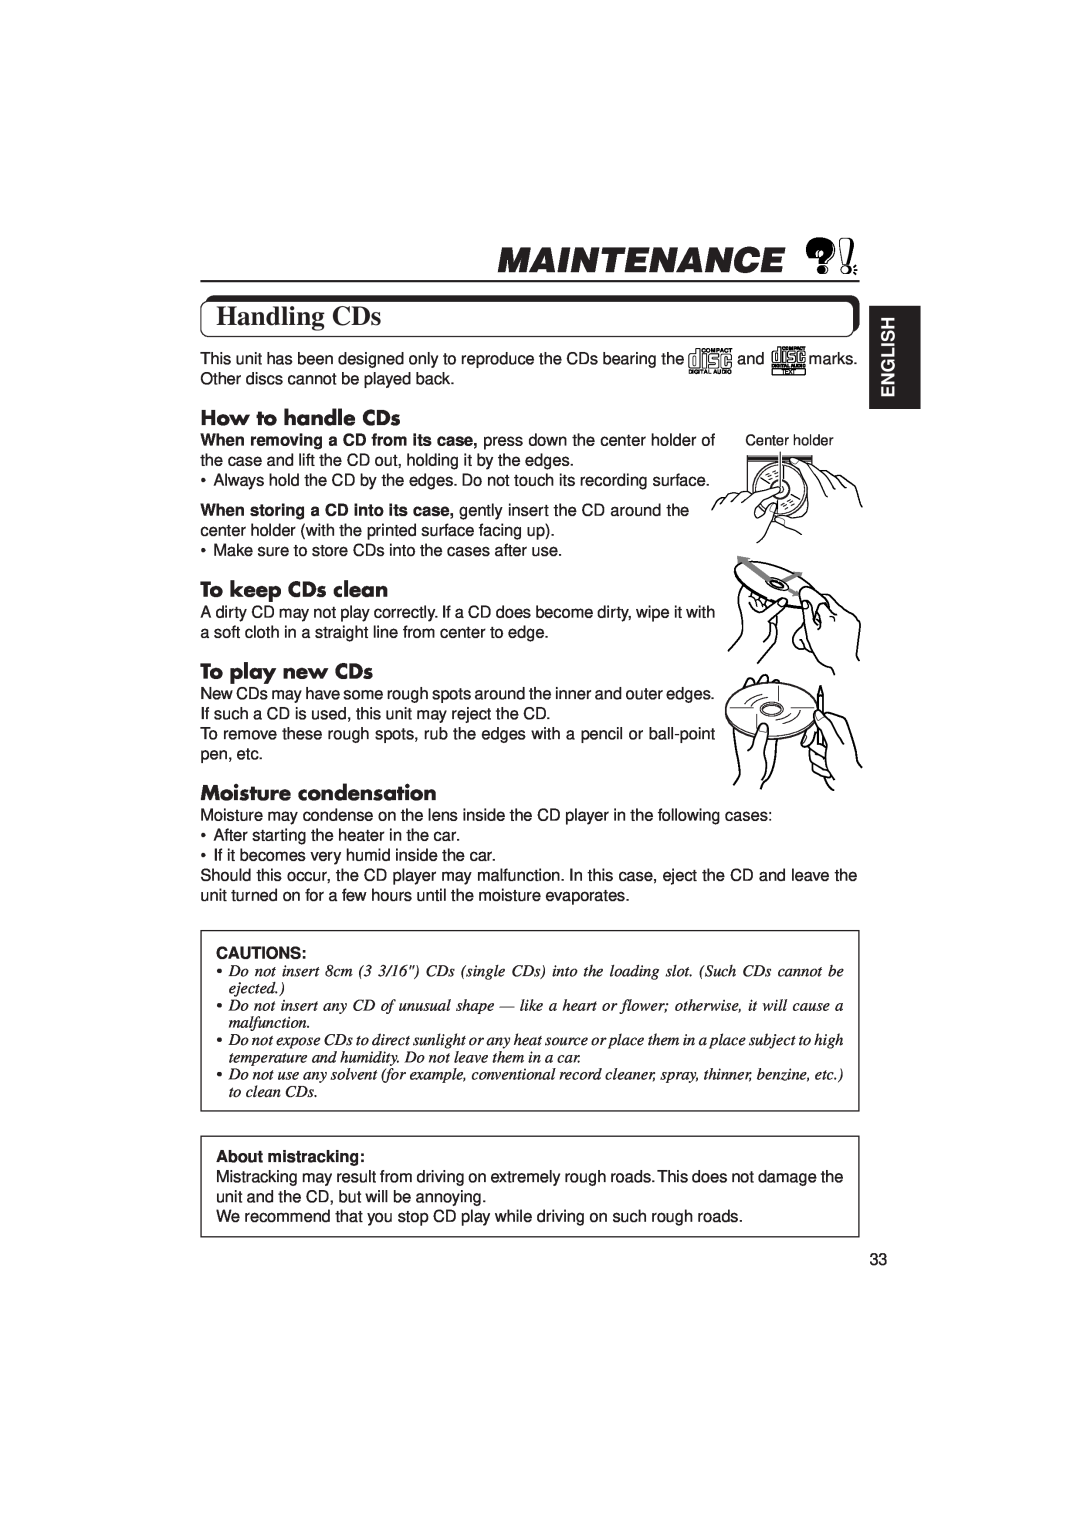 JVC KD-LX1 manual Maintenance, Handling CDs, How to handle CDs, To keep CDs clean, To play new CDs, Moisture condensation 